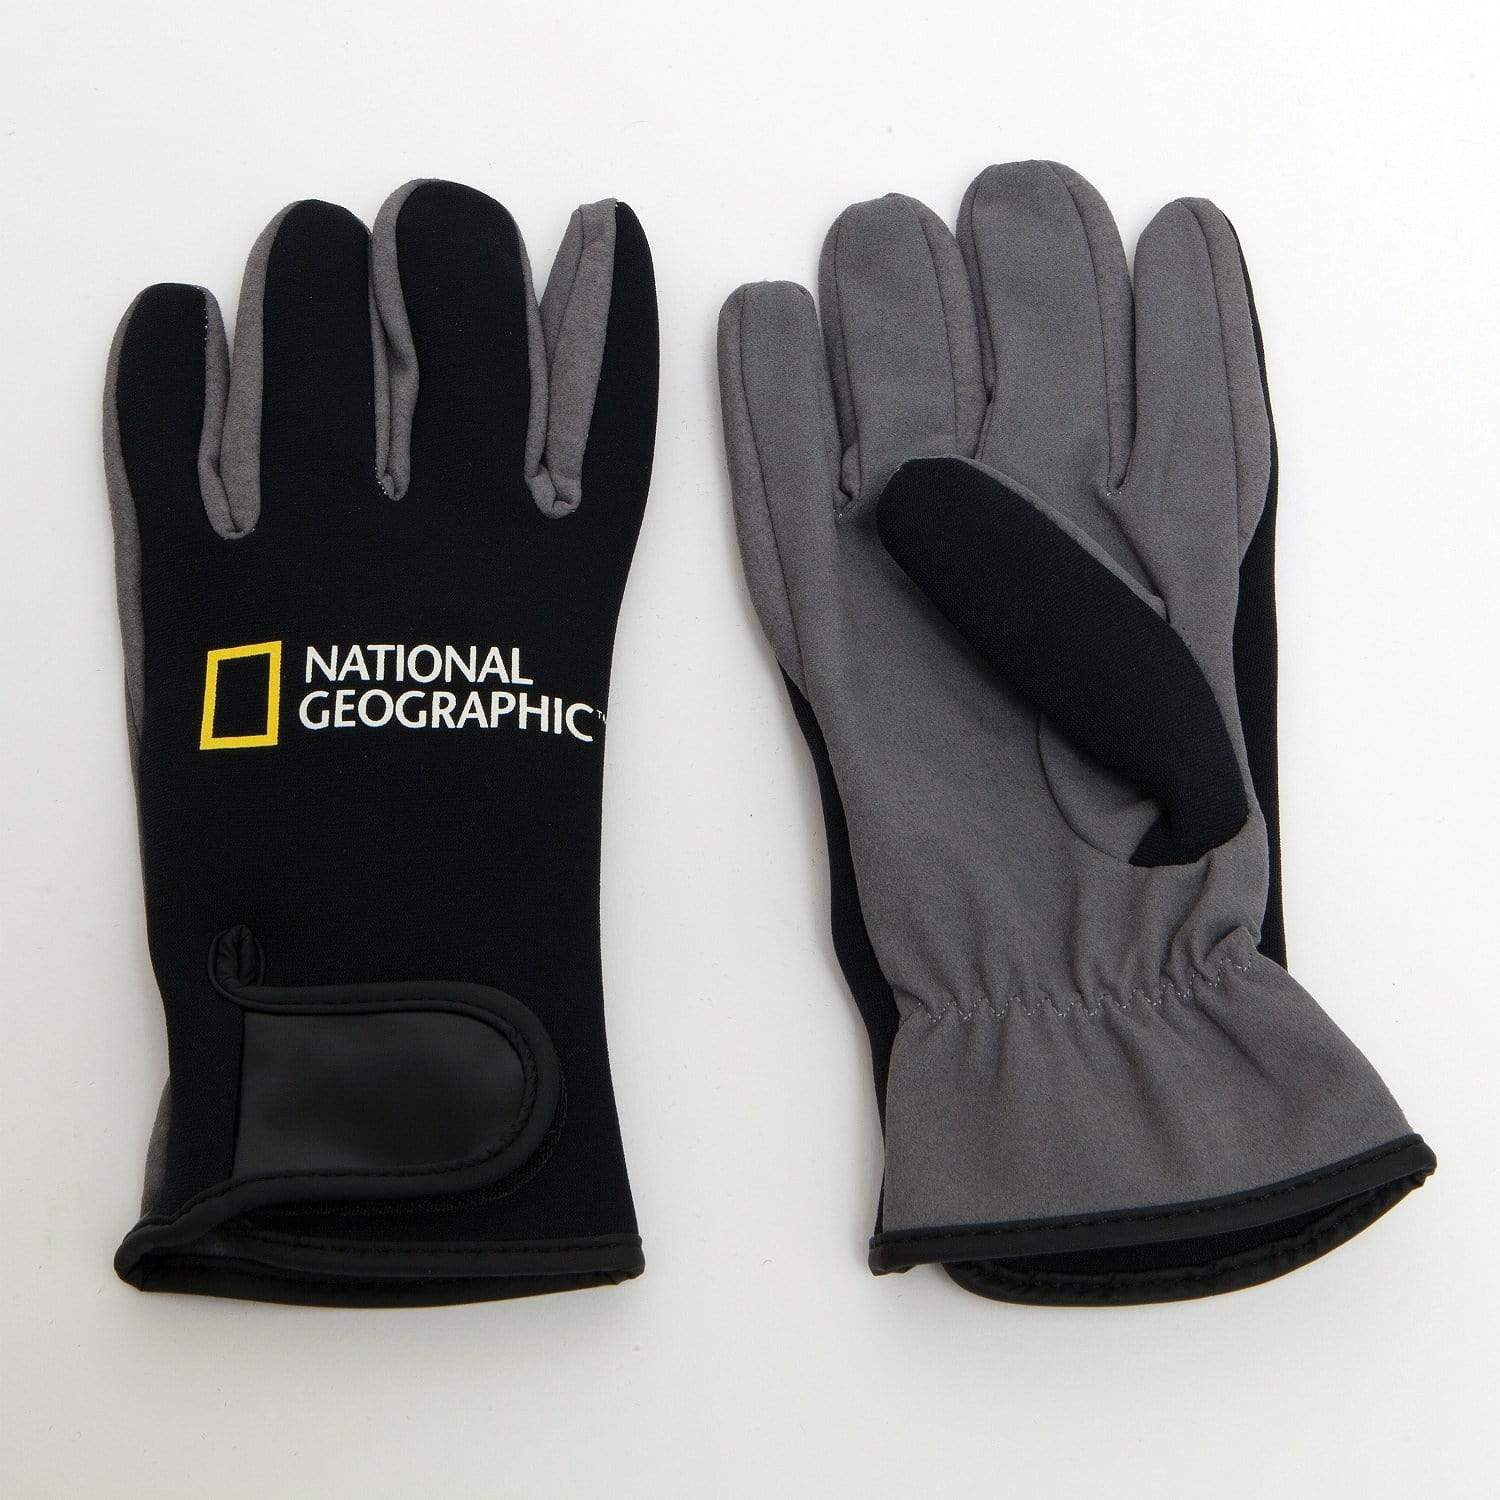 National Geographic Snorkeler Marine/Water Sports : Accessories Nat Geo Diving Neoprene Gloves - Small